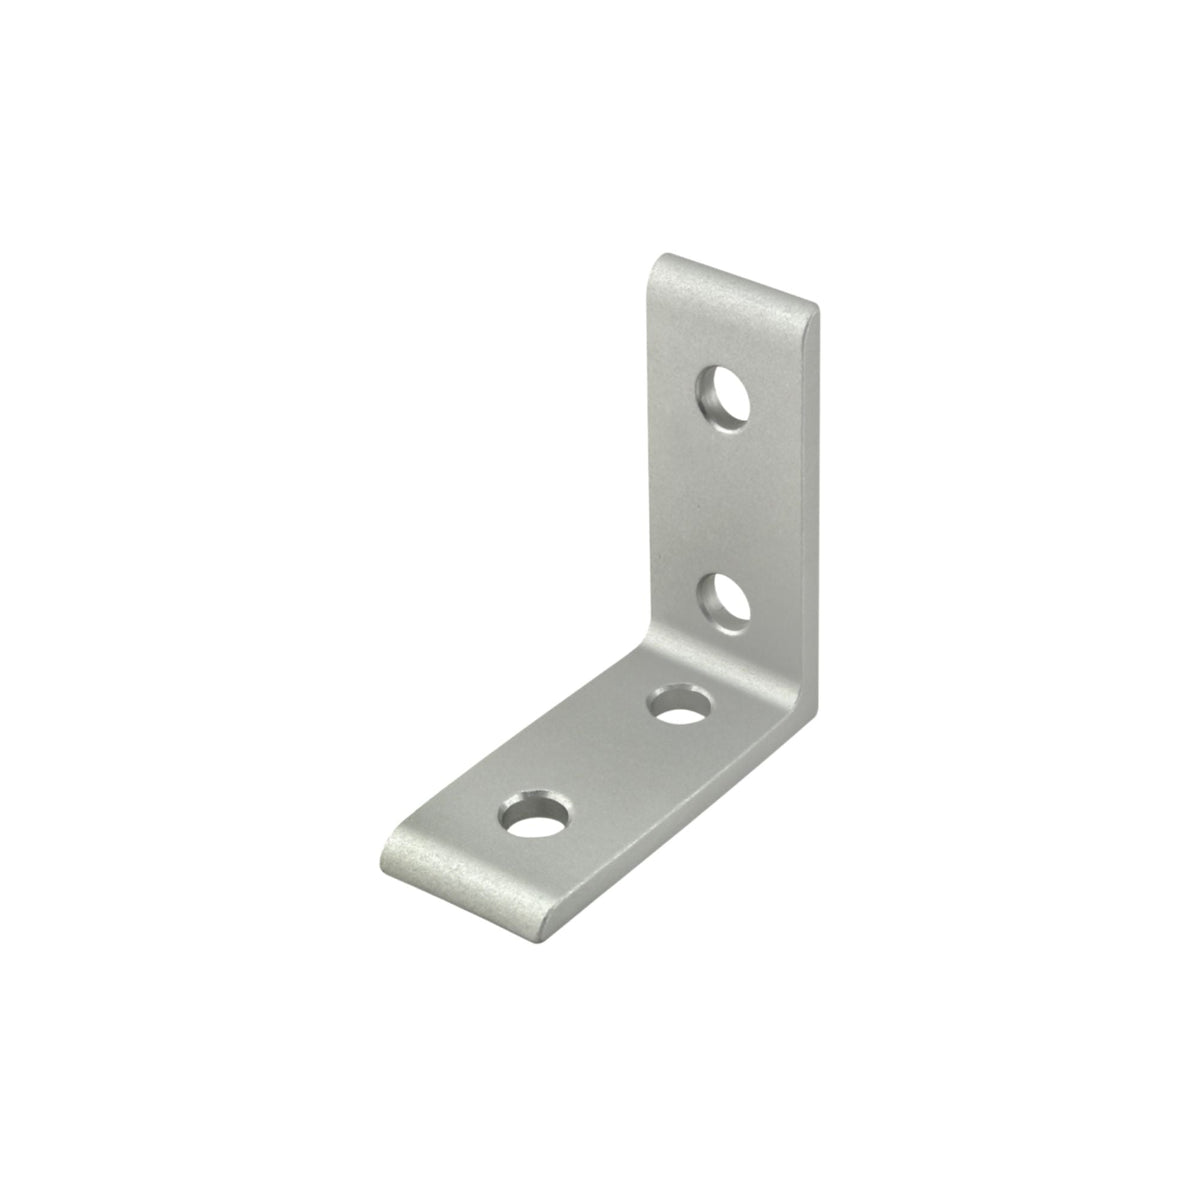 metal corner bracket with two mounting holes on each of the two sides